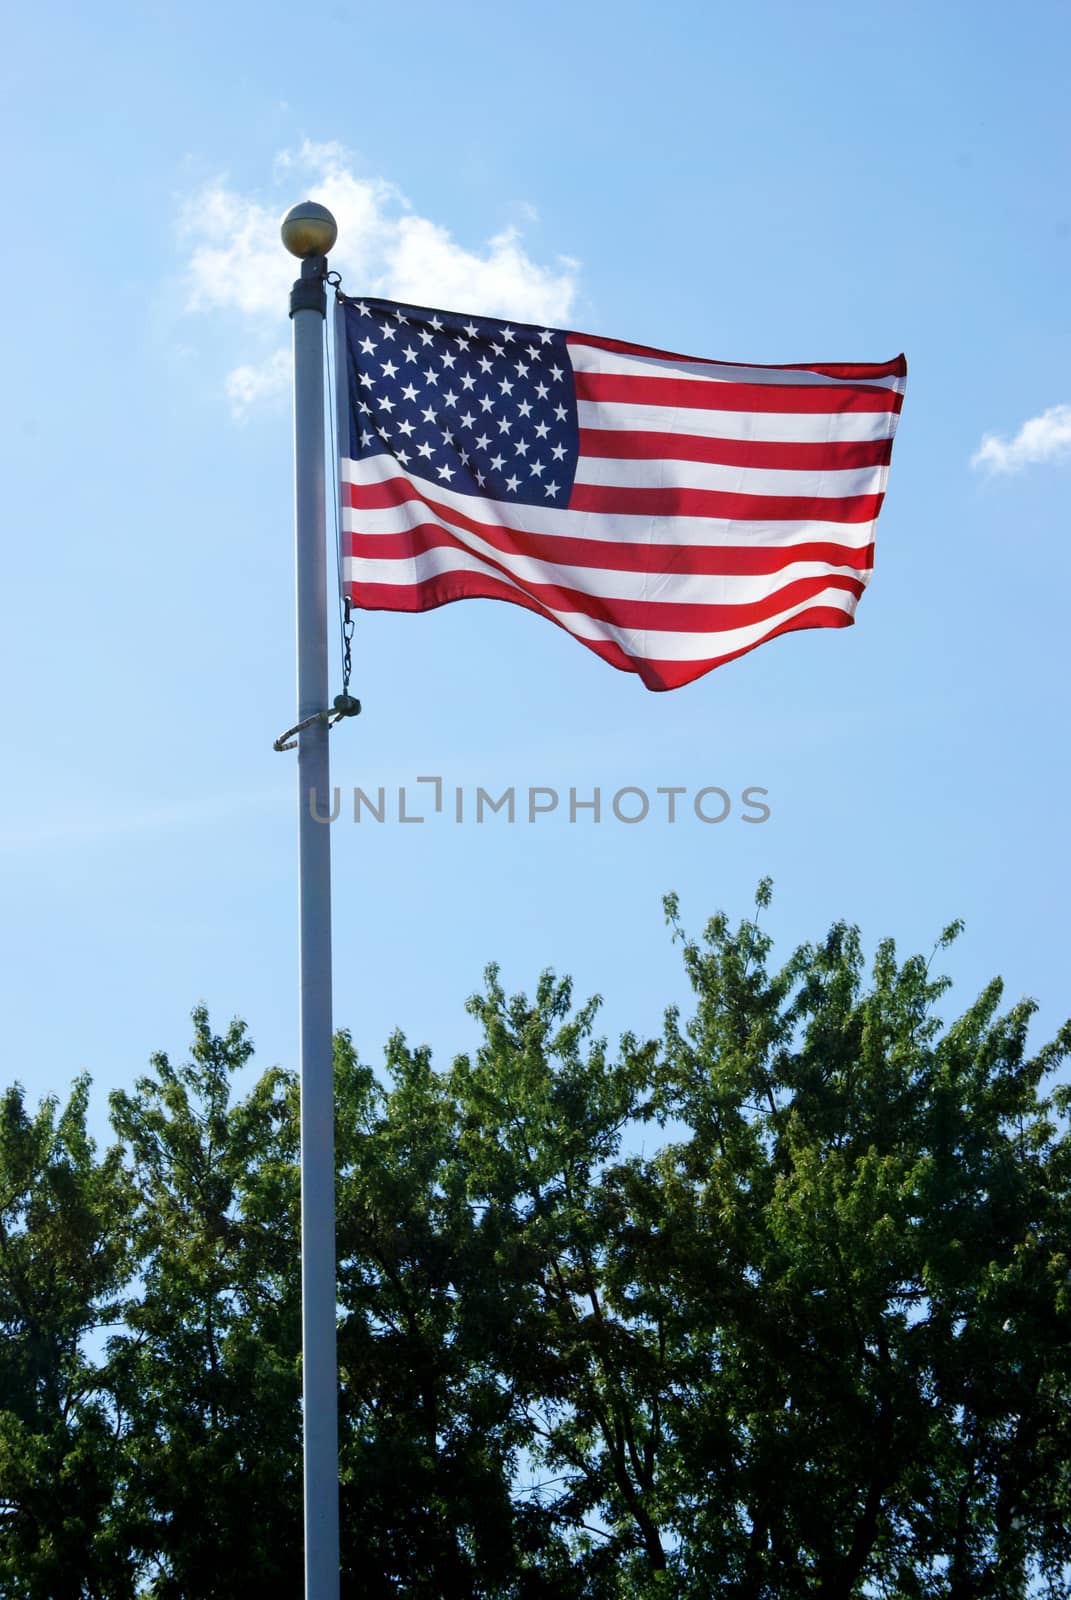 A vertical composition of an American flag flapping in the wind during the sunny daylight hours.